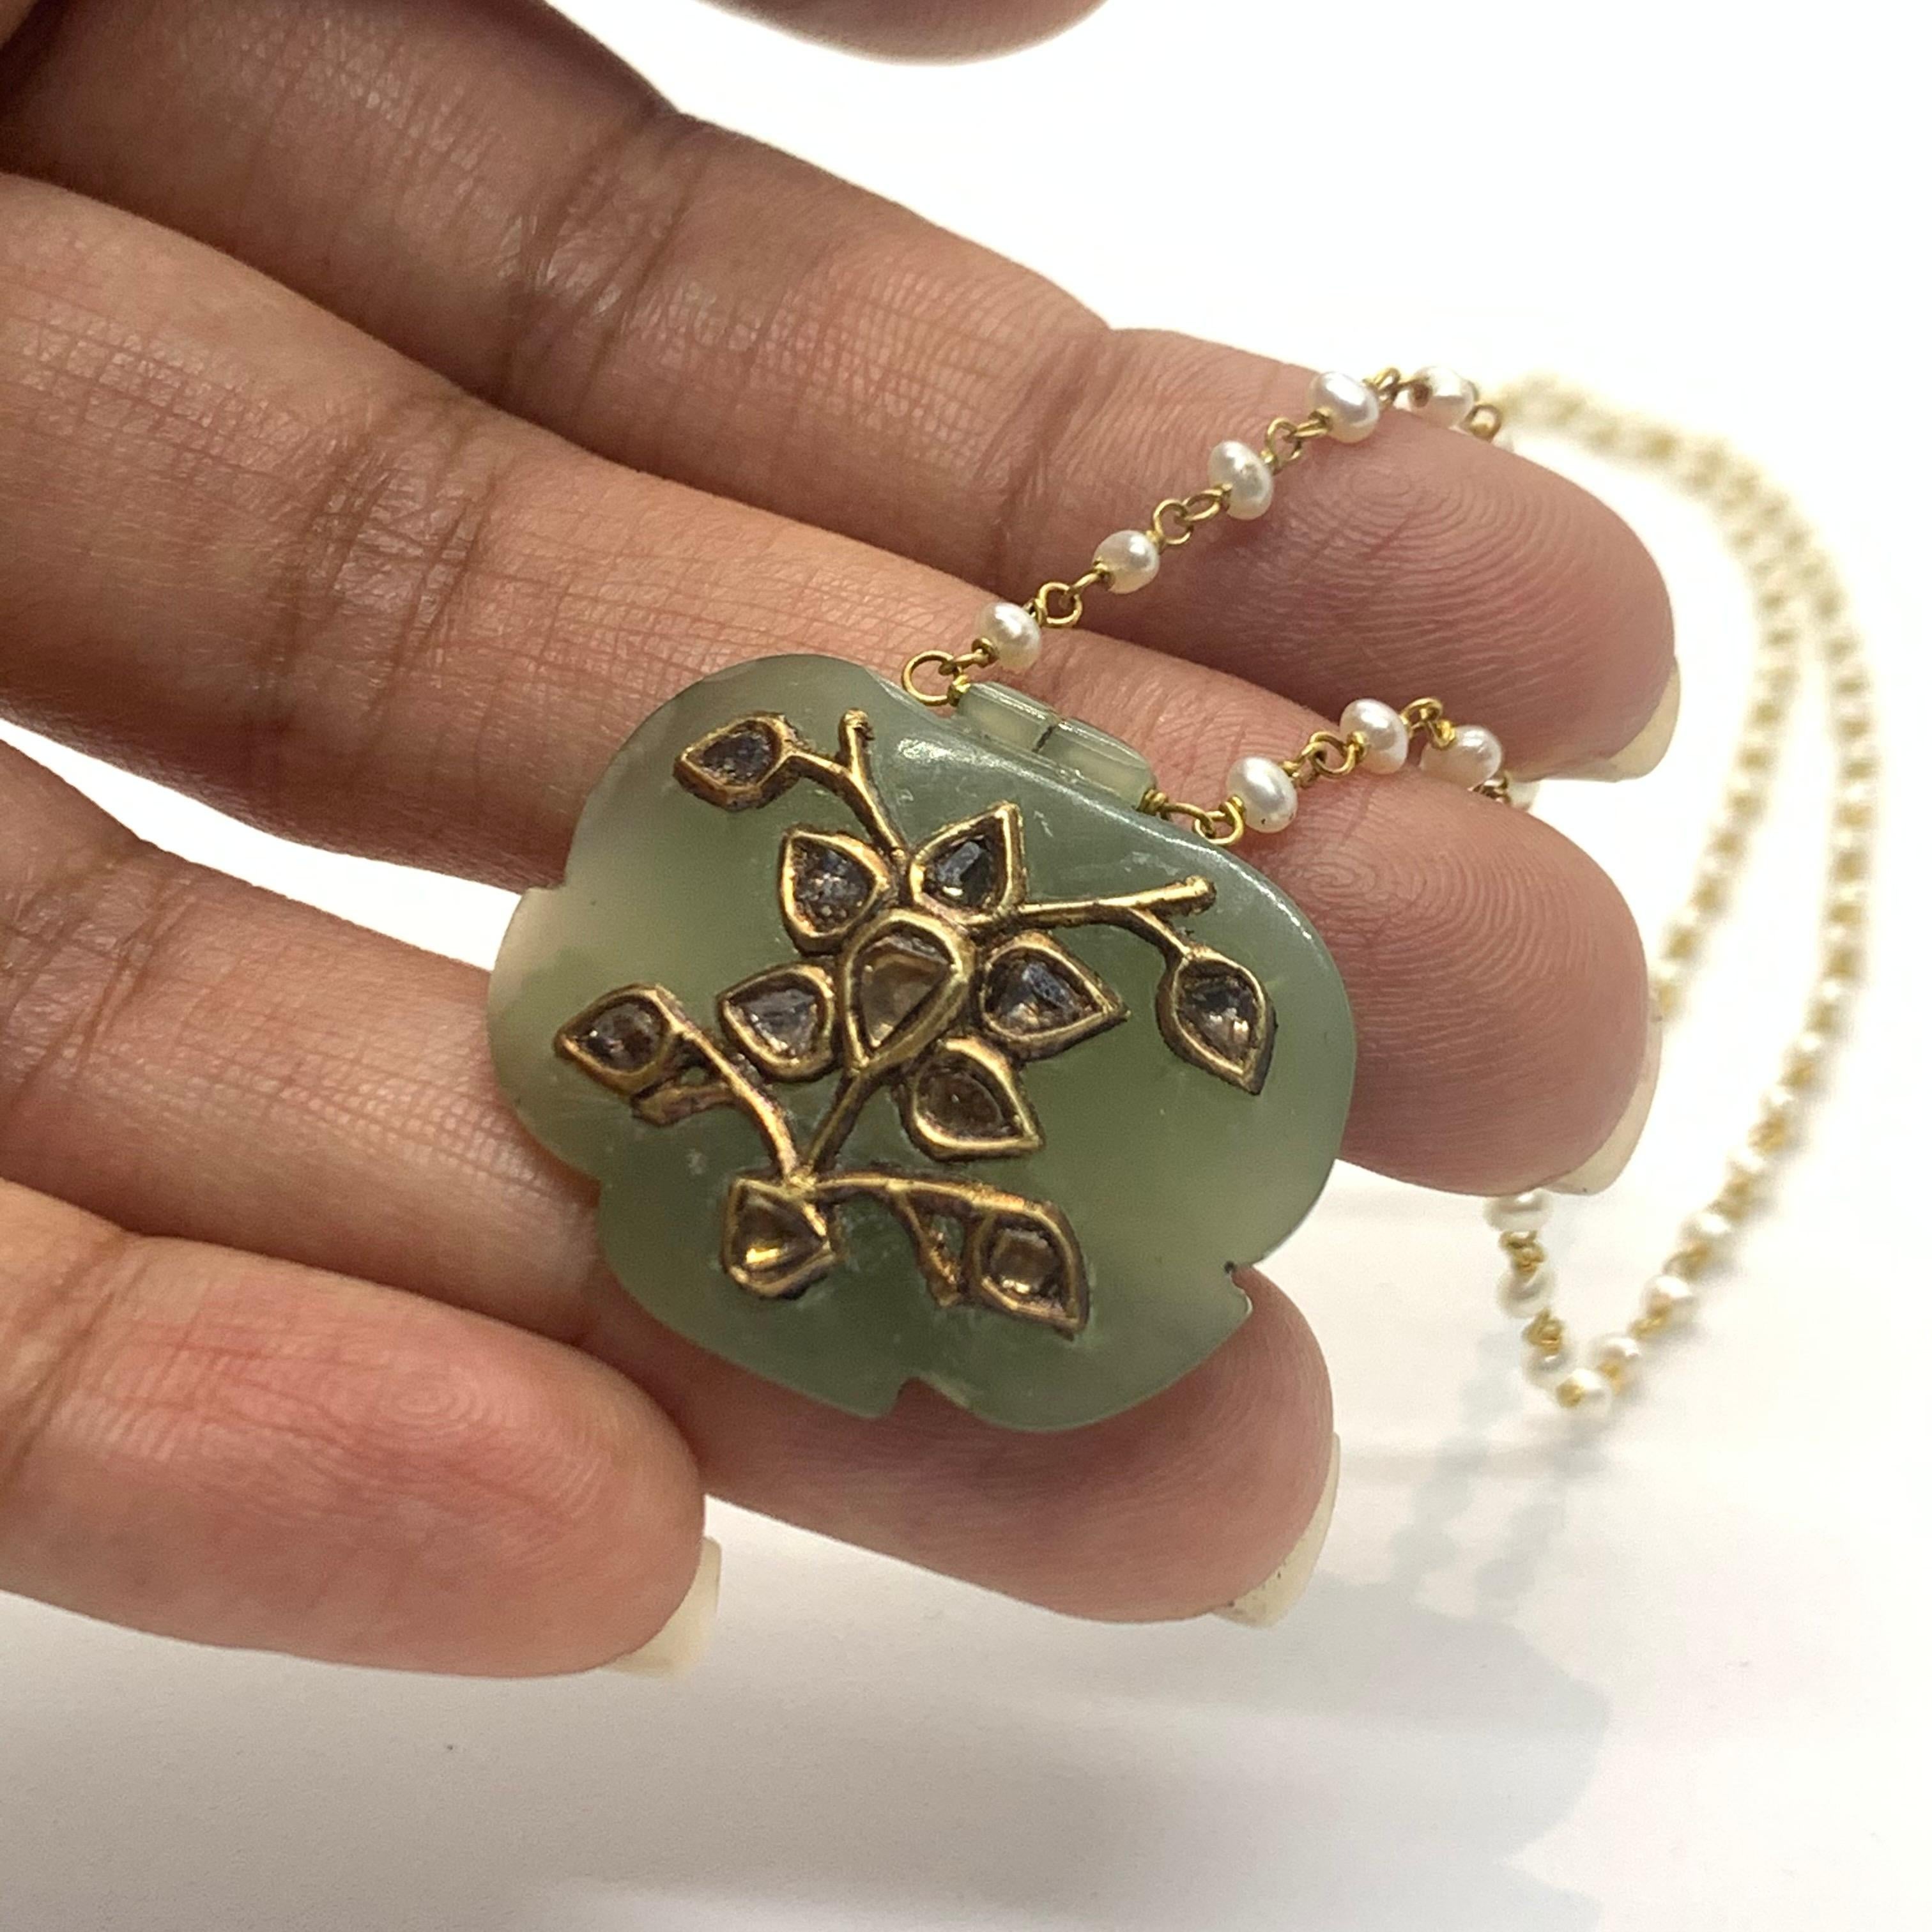 Cabochon Jade Pendant Studded with Diamonds Strung in a Chain with Pearls and 18K Gold